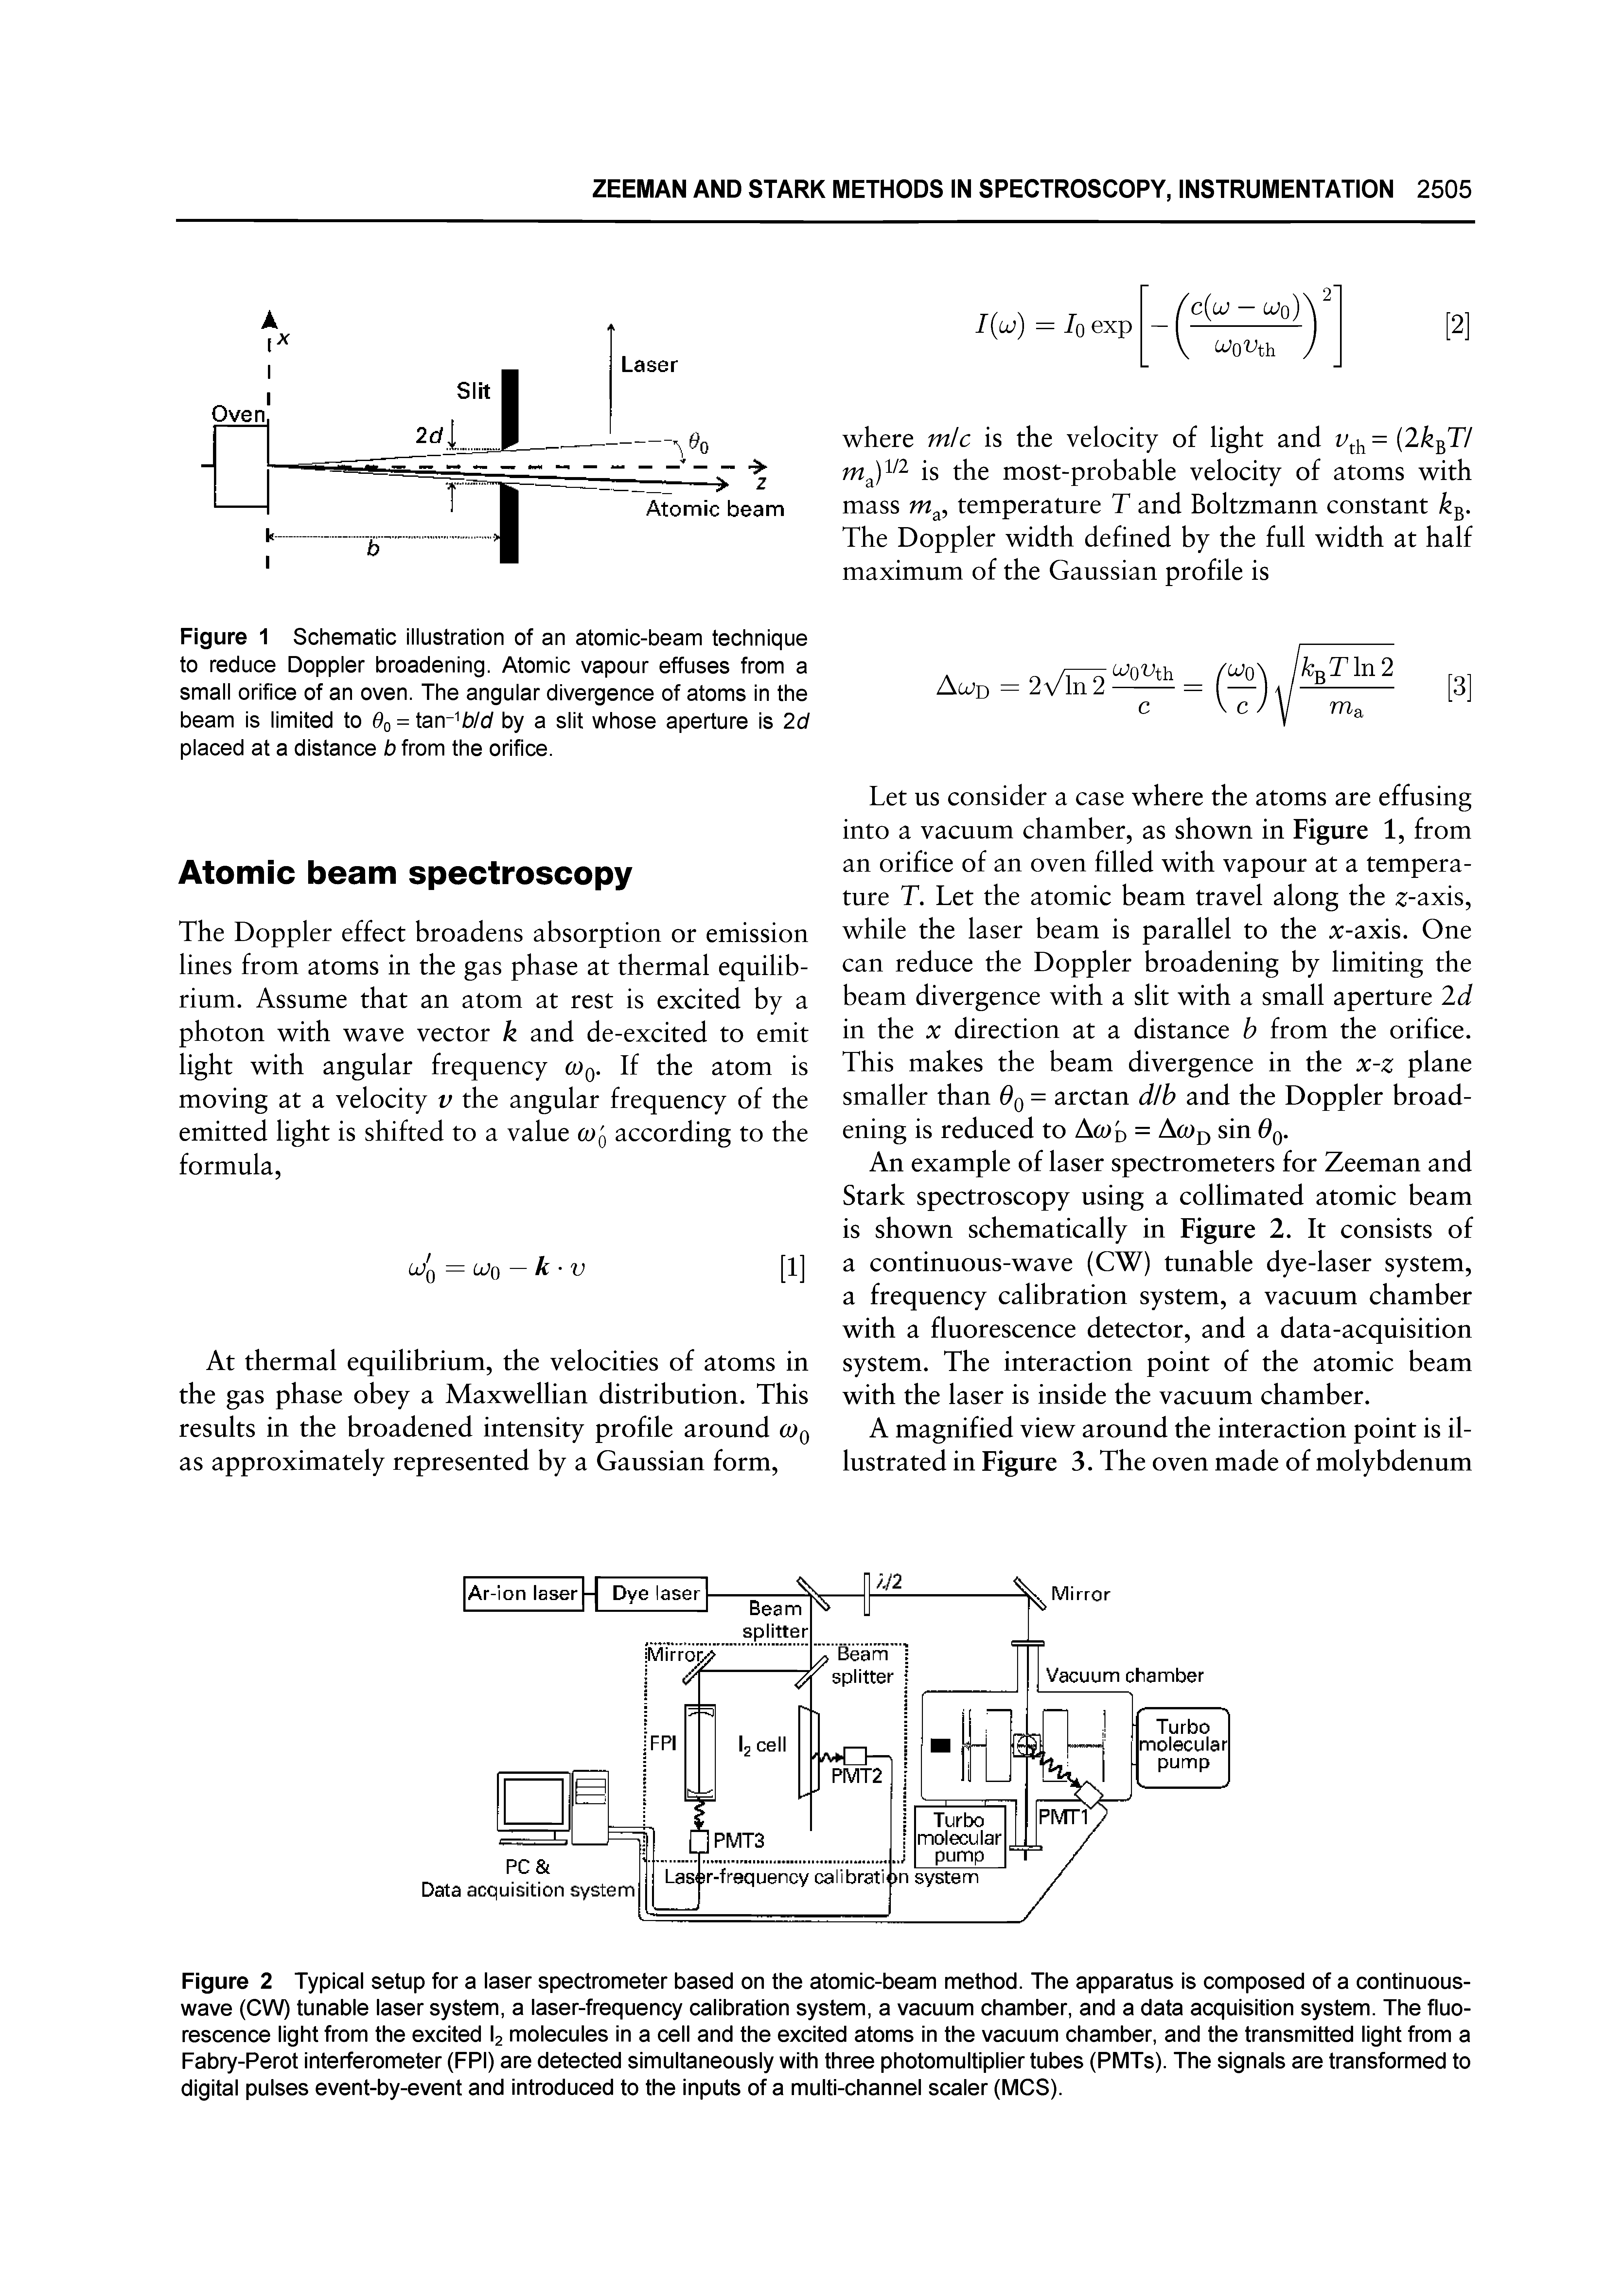 Figure 1 Schematic illustration of an atomic-beam technique to reduce Doppler broadening. Atomic vapour effuses from a small orifice of an oven. The angular divergence of atoms in the beam is limited to 6Q = Brr bldi by a slit whose aperture is 2d placed at a distance b from the orifice.